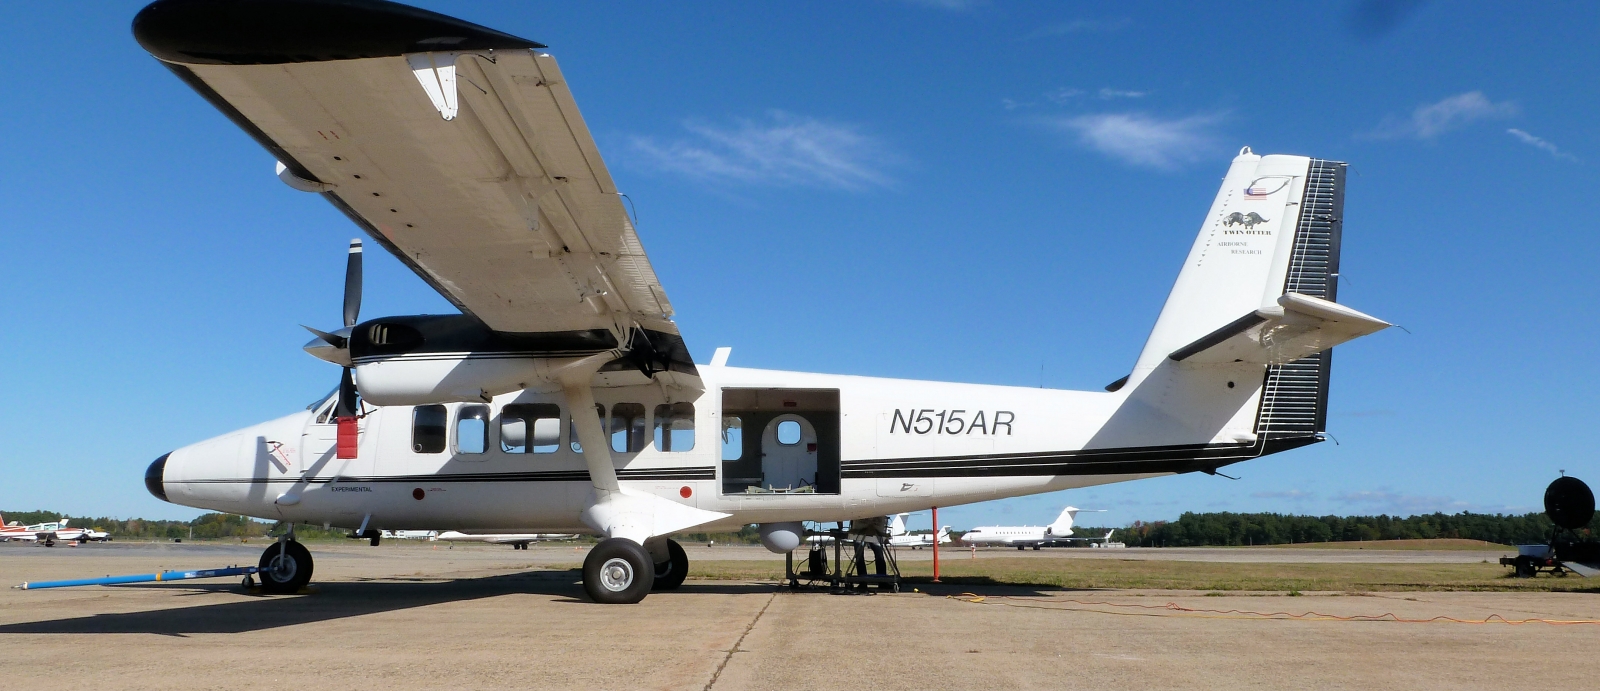 The Twin Otter aircraft serves as an airborne test bed.